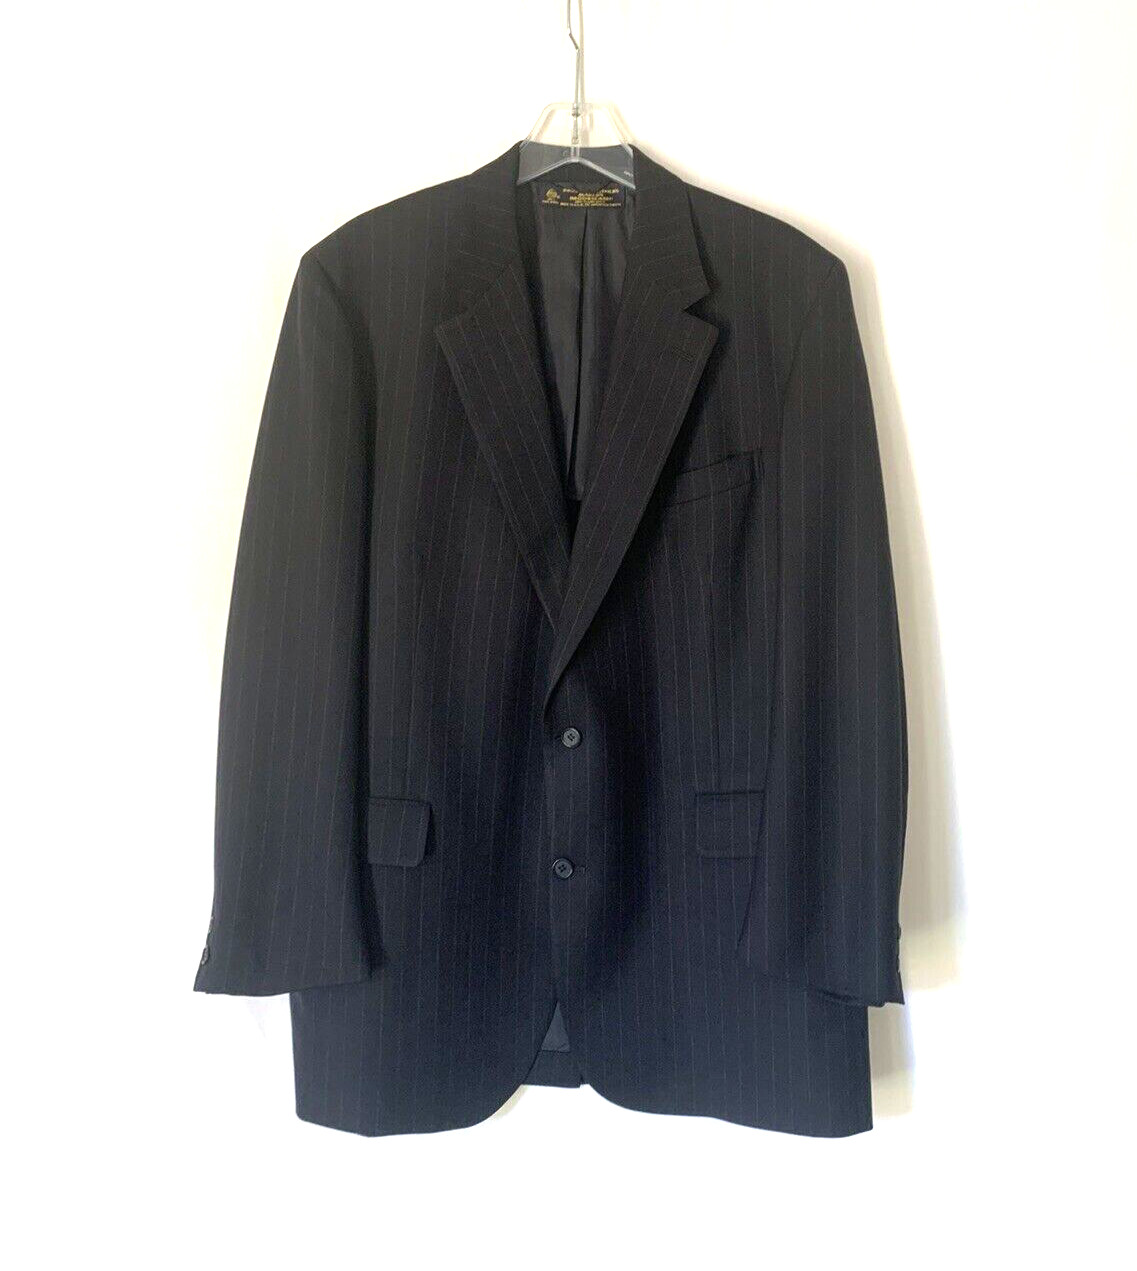 VTG Brooks Brothers Makers Brooksease 2 Pc Suit 46 Gray Wool Pinstriped